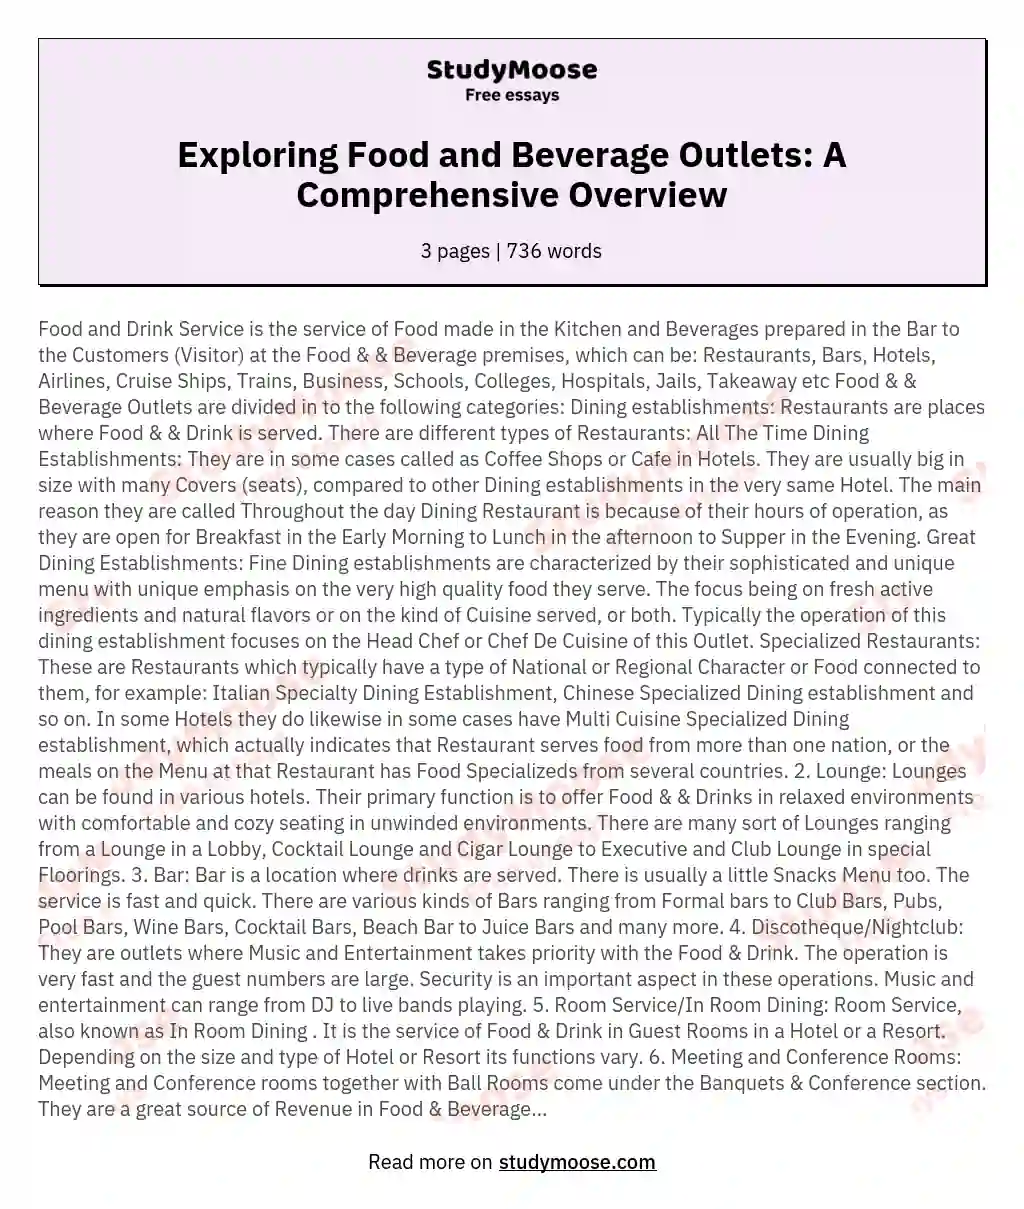 Exploring Food and Beverage Outlets: A Comprehensive Overview essay